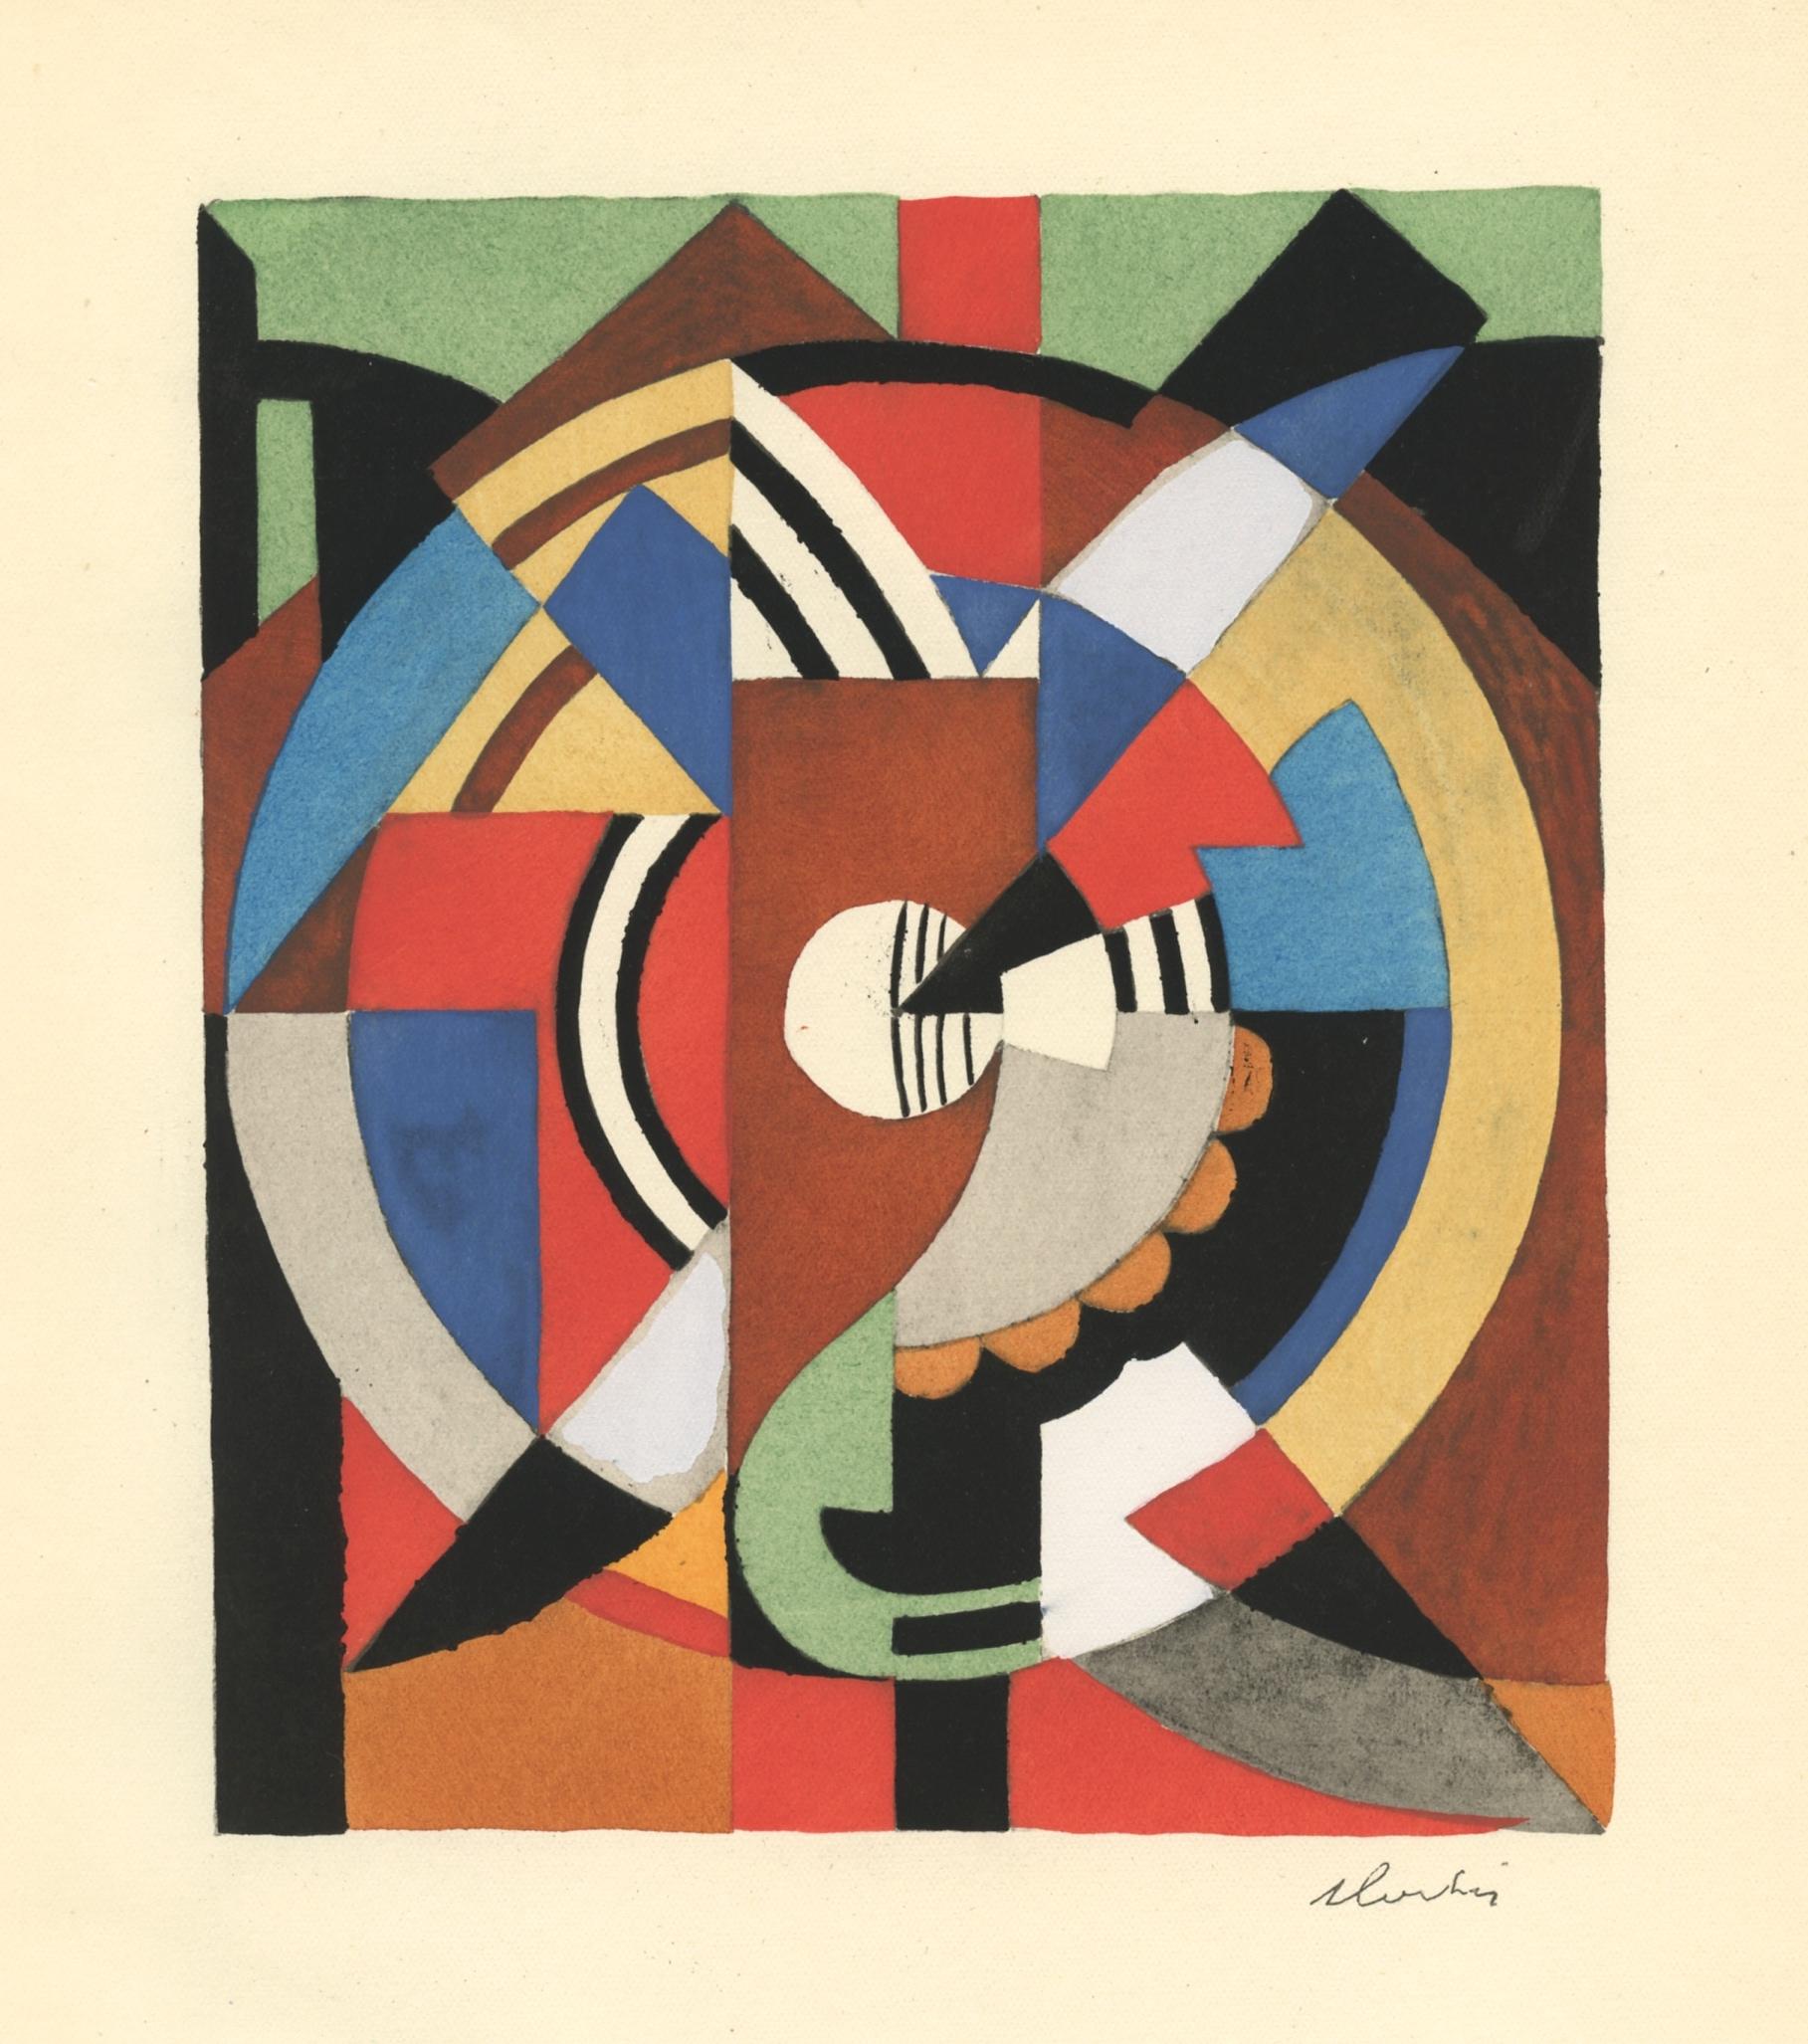 Medium: pochoir (after the watercolor). Printed in Paris in 1929 at the atelier of Daniel Jacomet for L'Art Cubiste. Image size: 6 7/8 x 5 7/8 inches (173 x 150 mm). A text inscription beneath the image identifies the artist. Signed in the plate